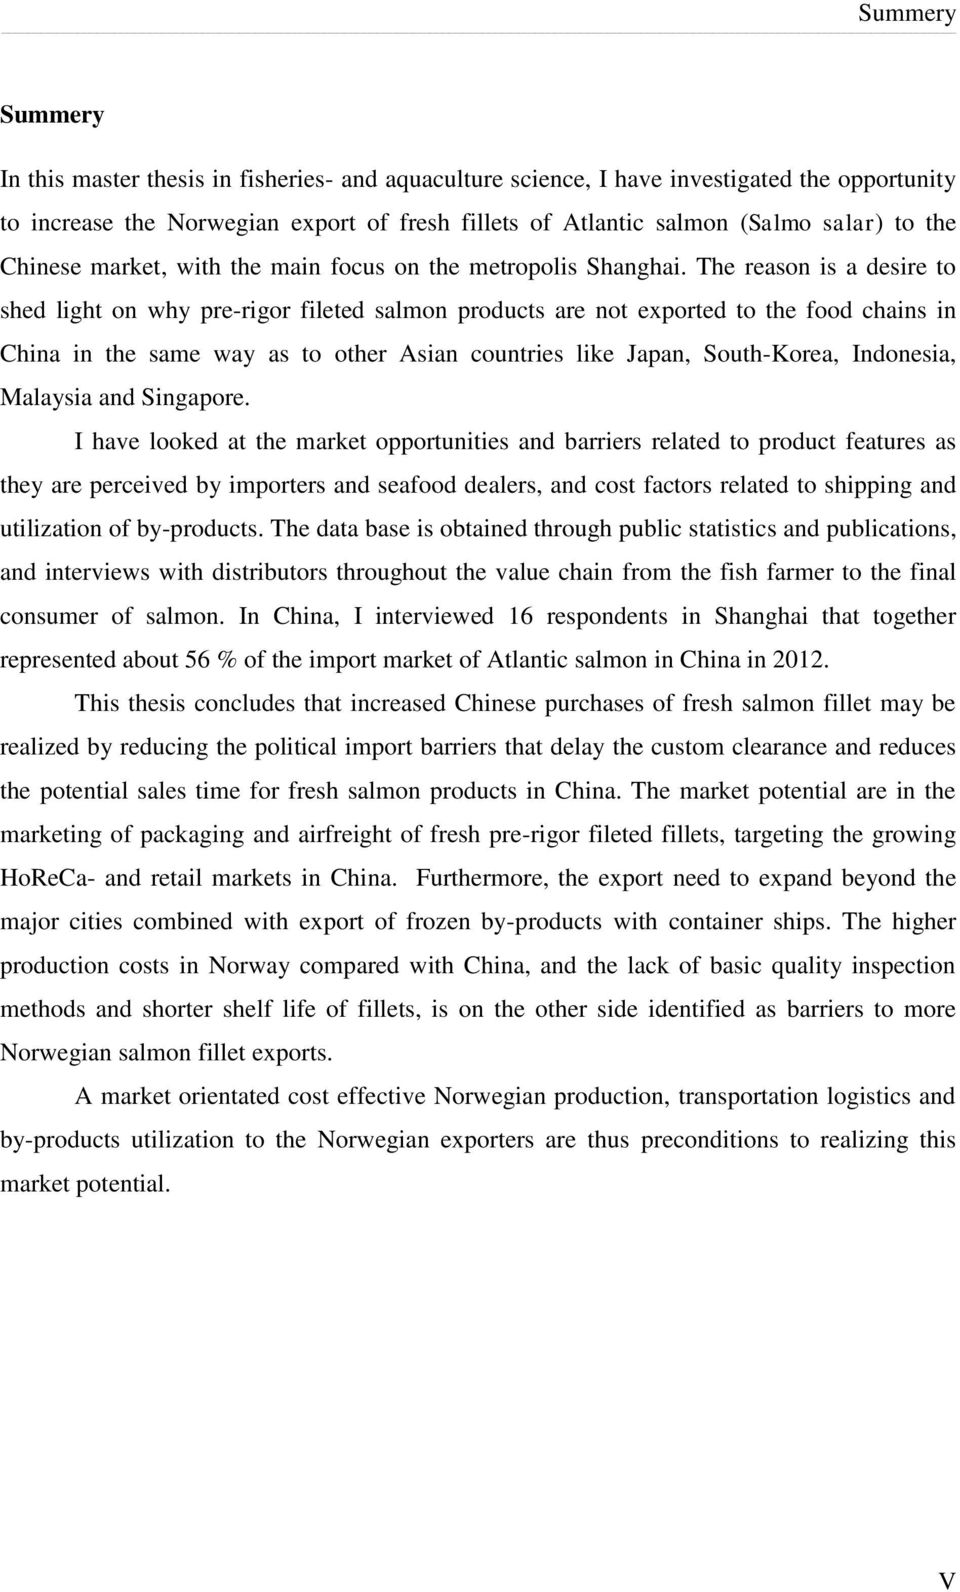 The reason is a desire to shed light on why pre-rigor fileted salmon products are not exported to the food chains in China in the same way as to other Asian countries like Japan, South-Korea,